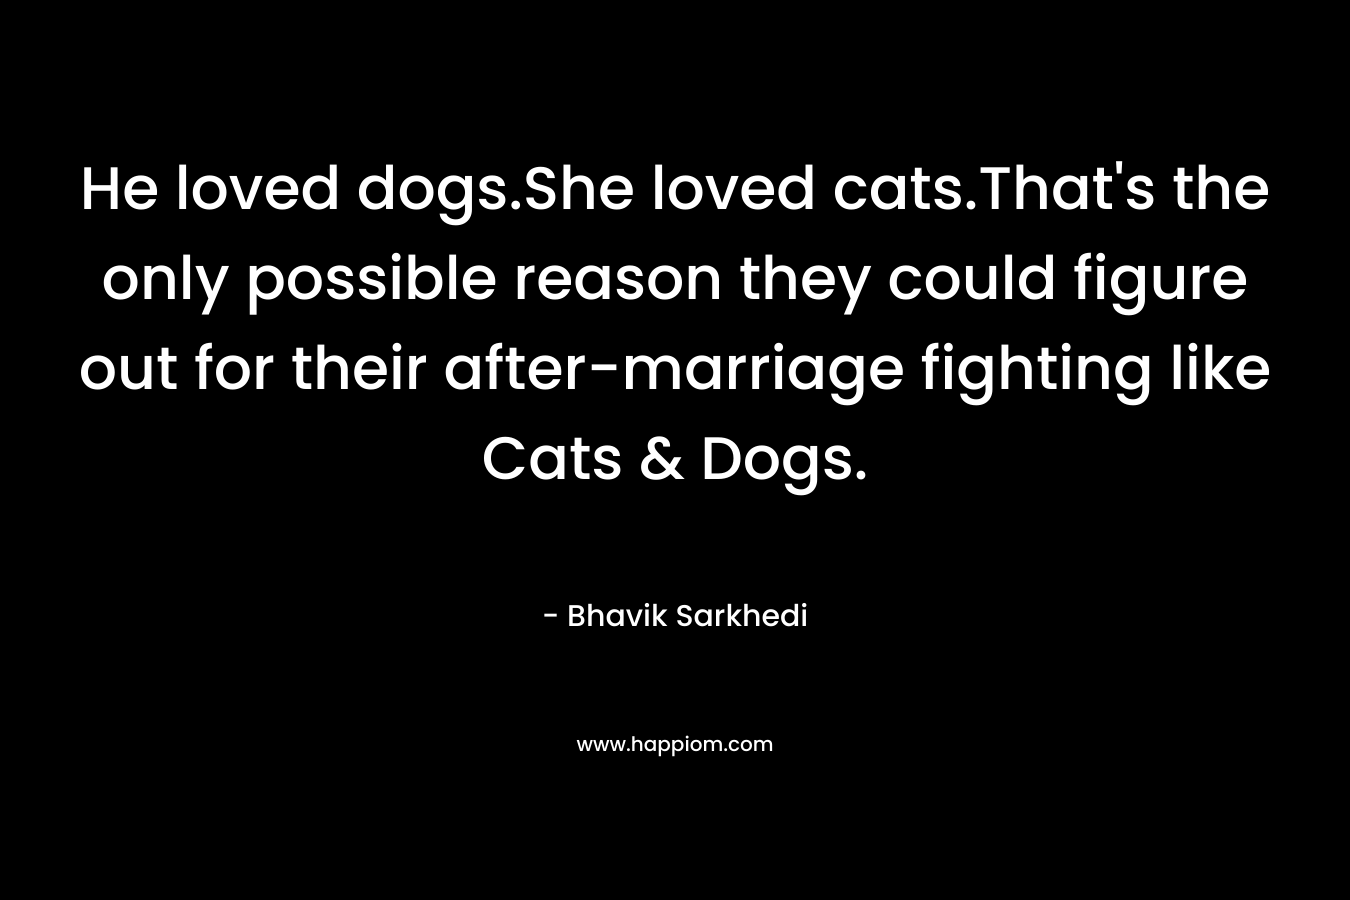 He loved dogs.She loved cats.That's the only possible reason they could figure out for their after-marriage fighting like Cats & Dogs.